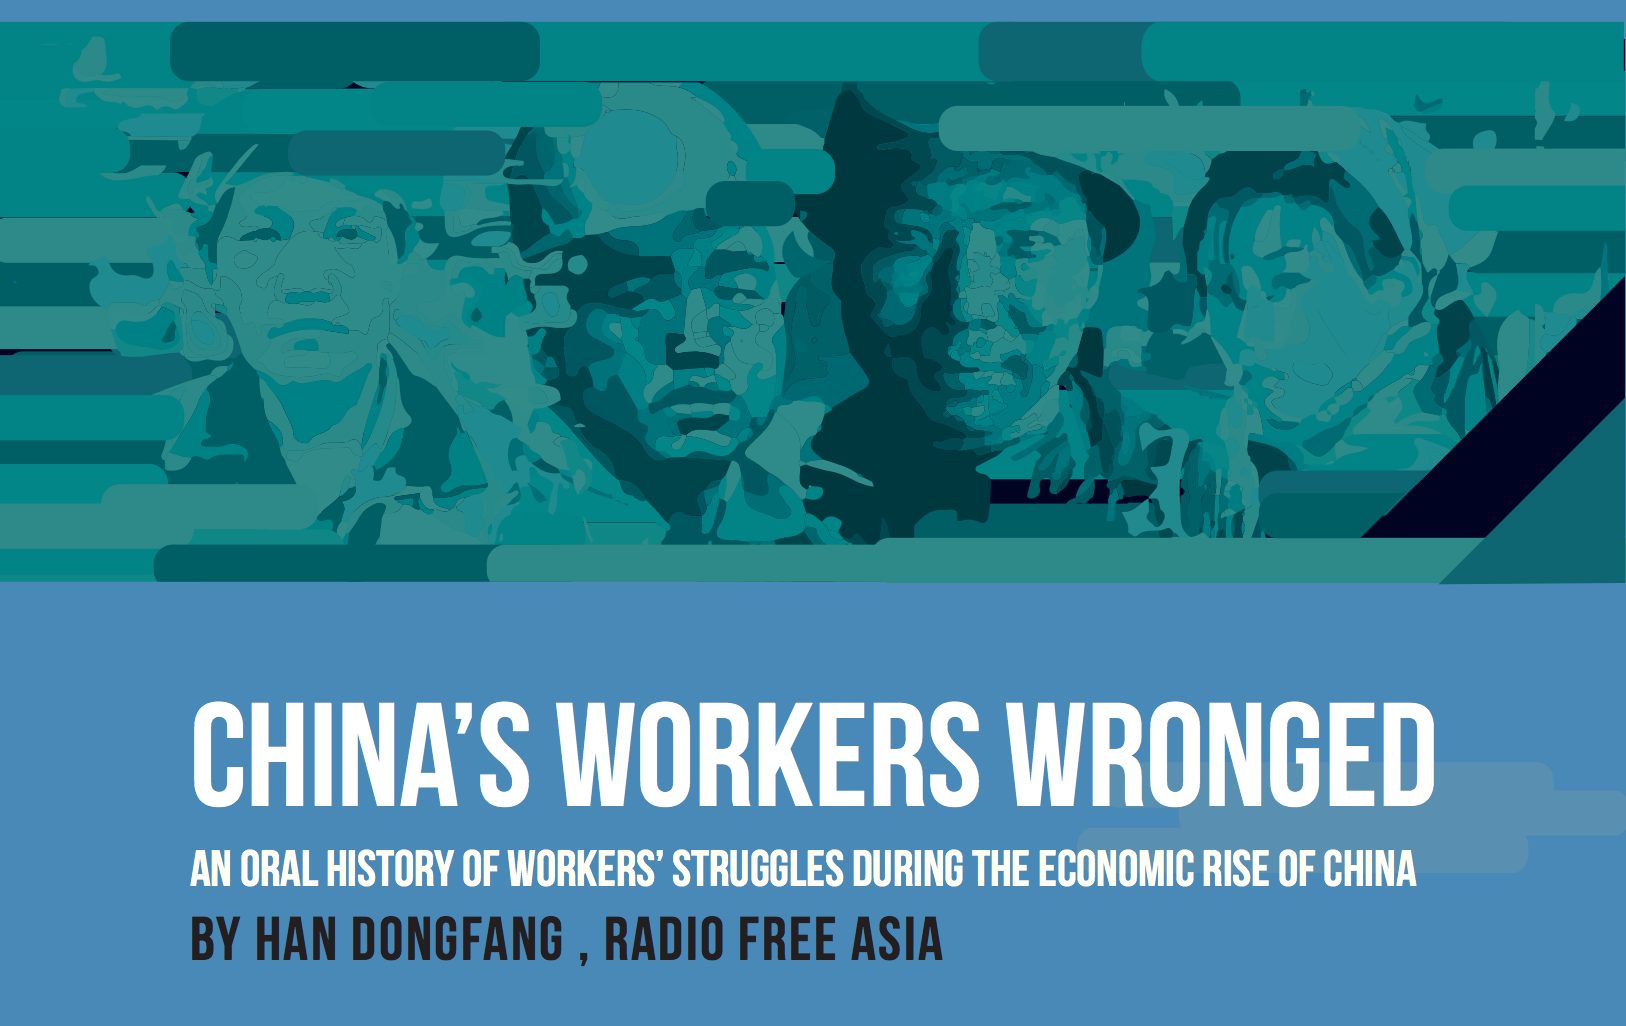 RFA e-book by Han Dongfang uncovers ‘dark side of China’s economic rise,’ proposes a way out